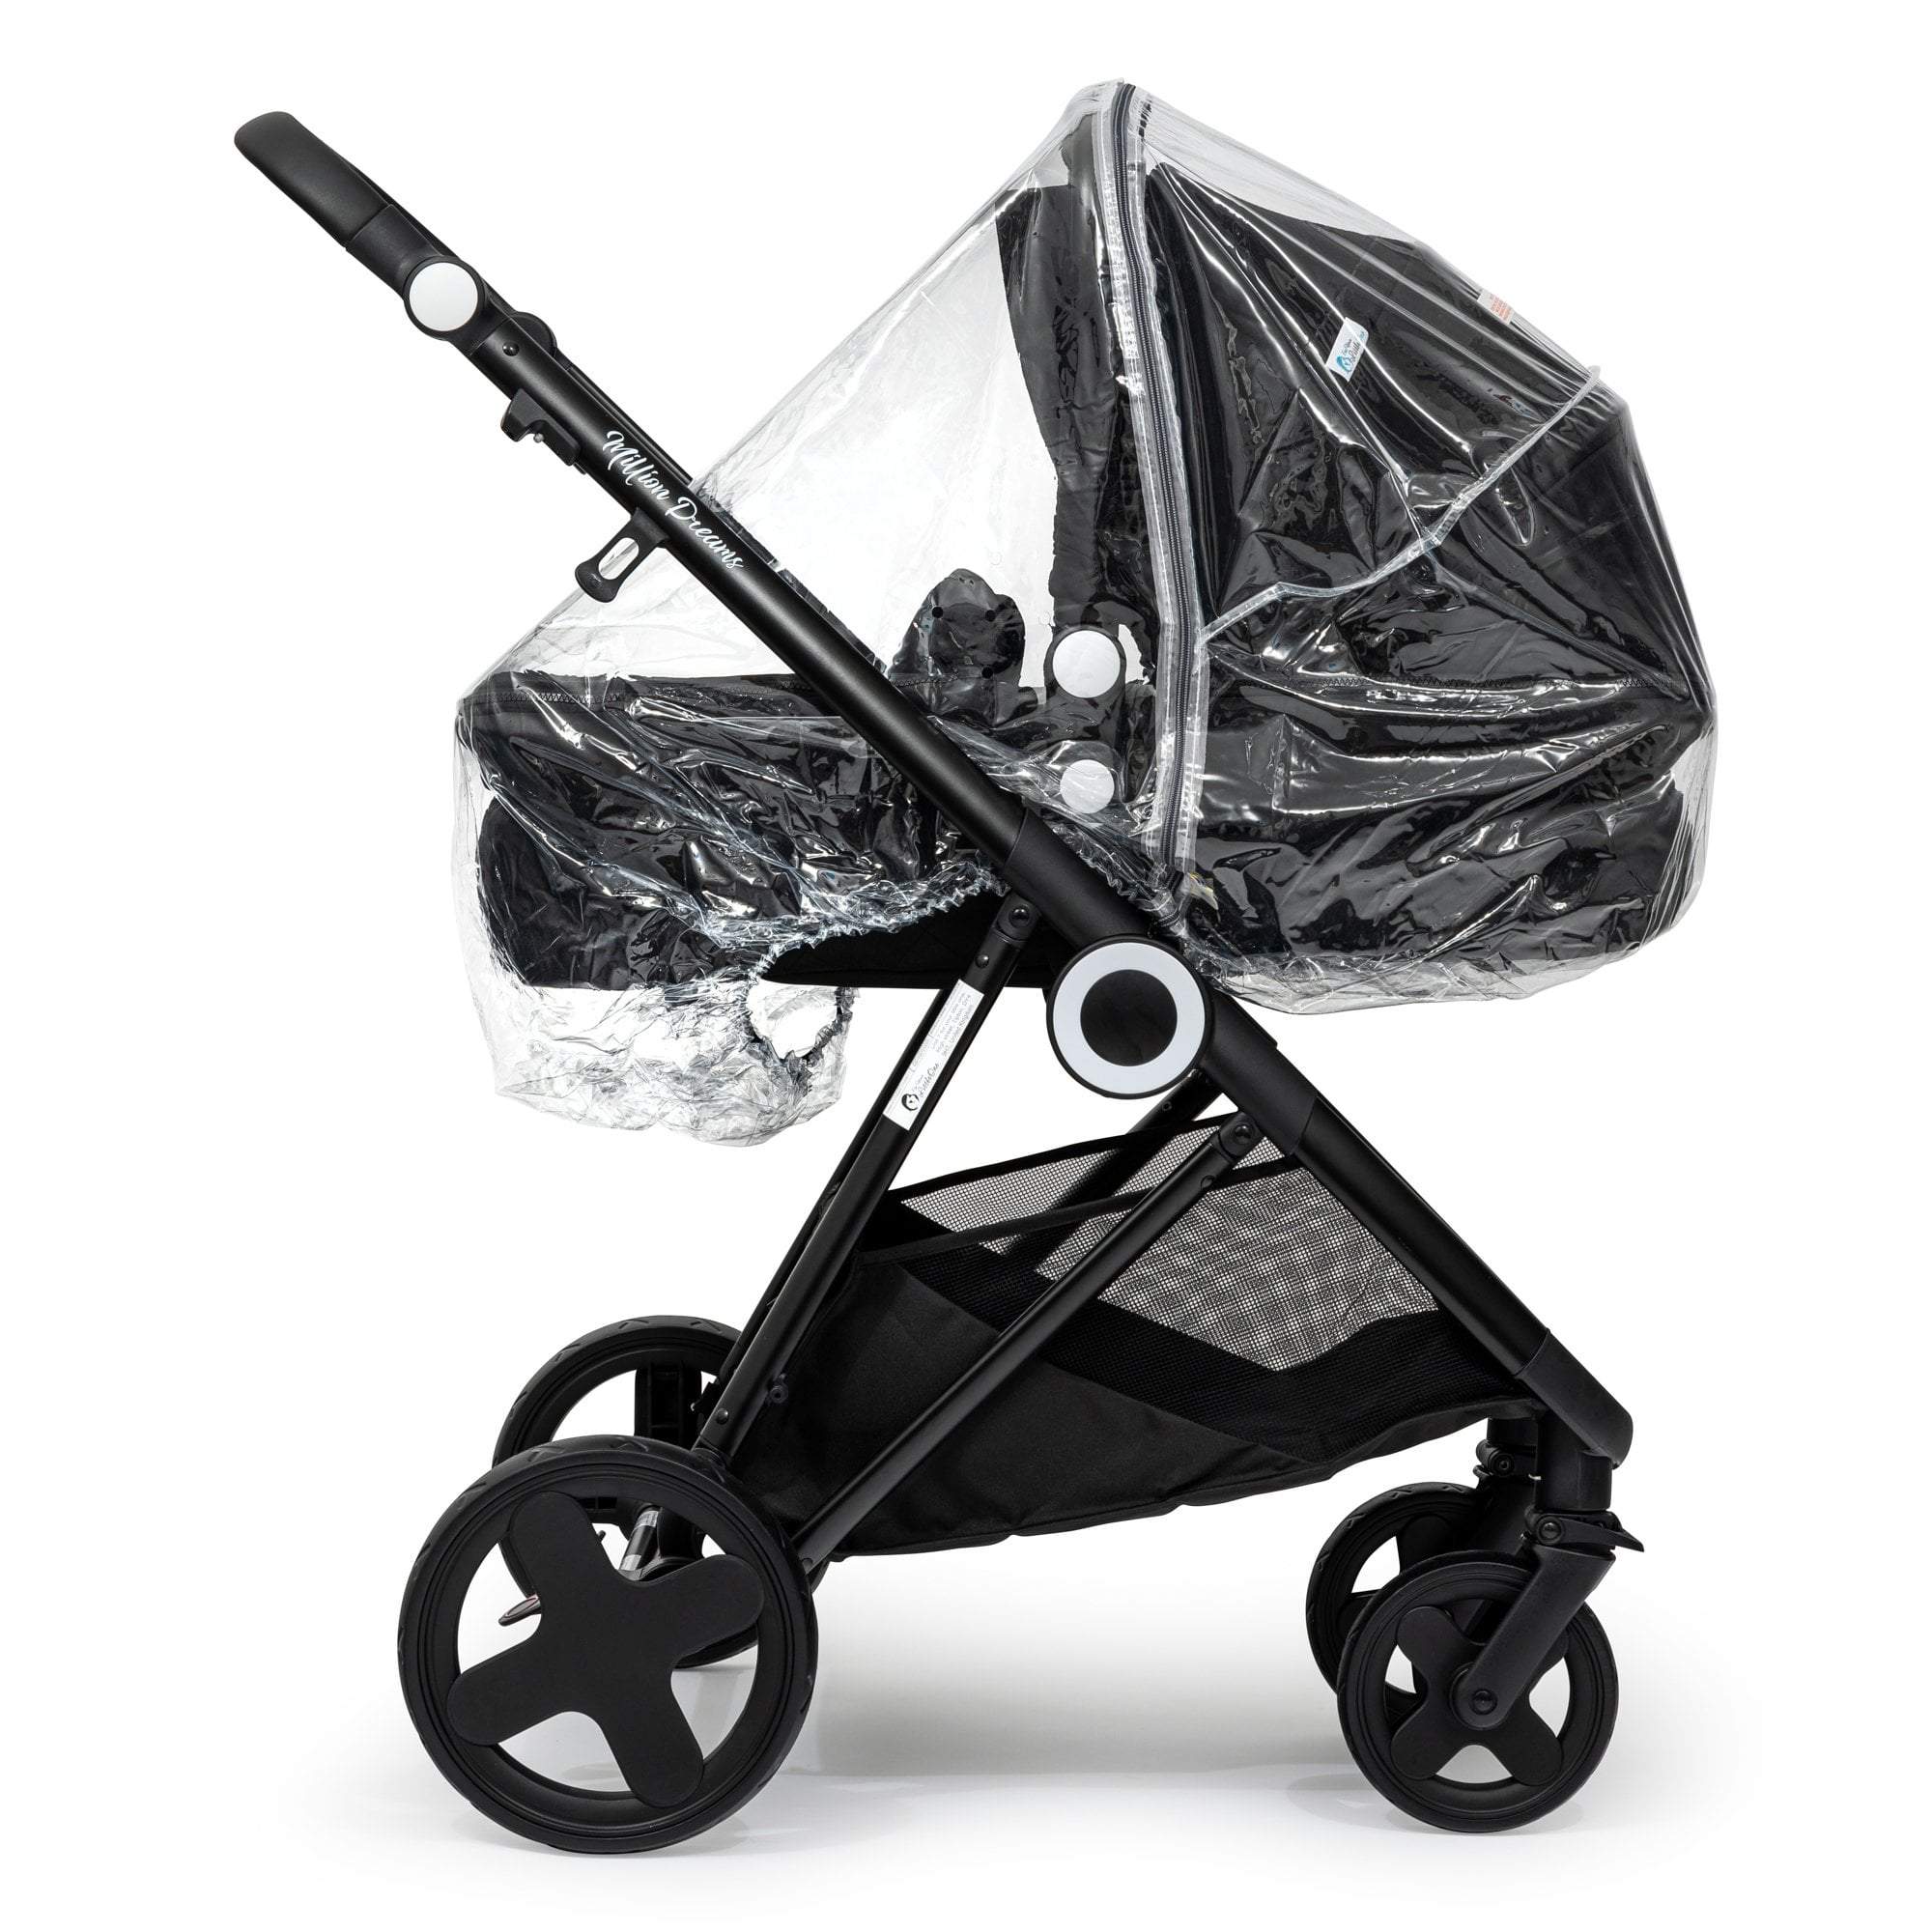 Carrycot Raincover Compatible With iCandy - Fits All Models - For Your Little One